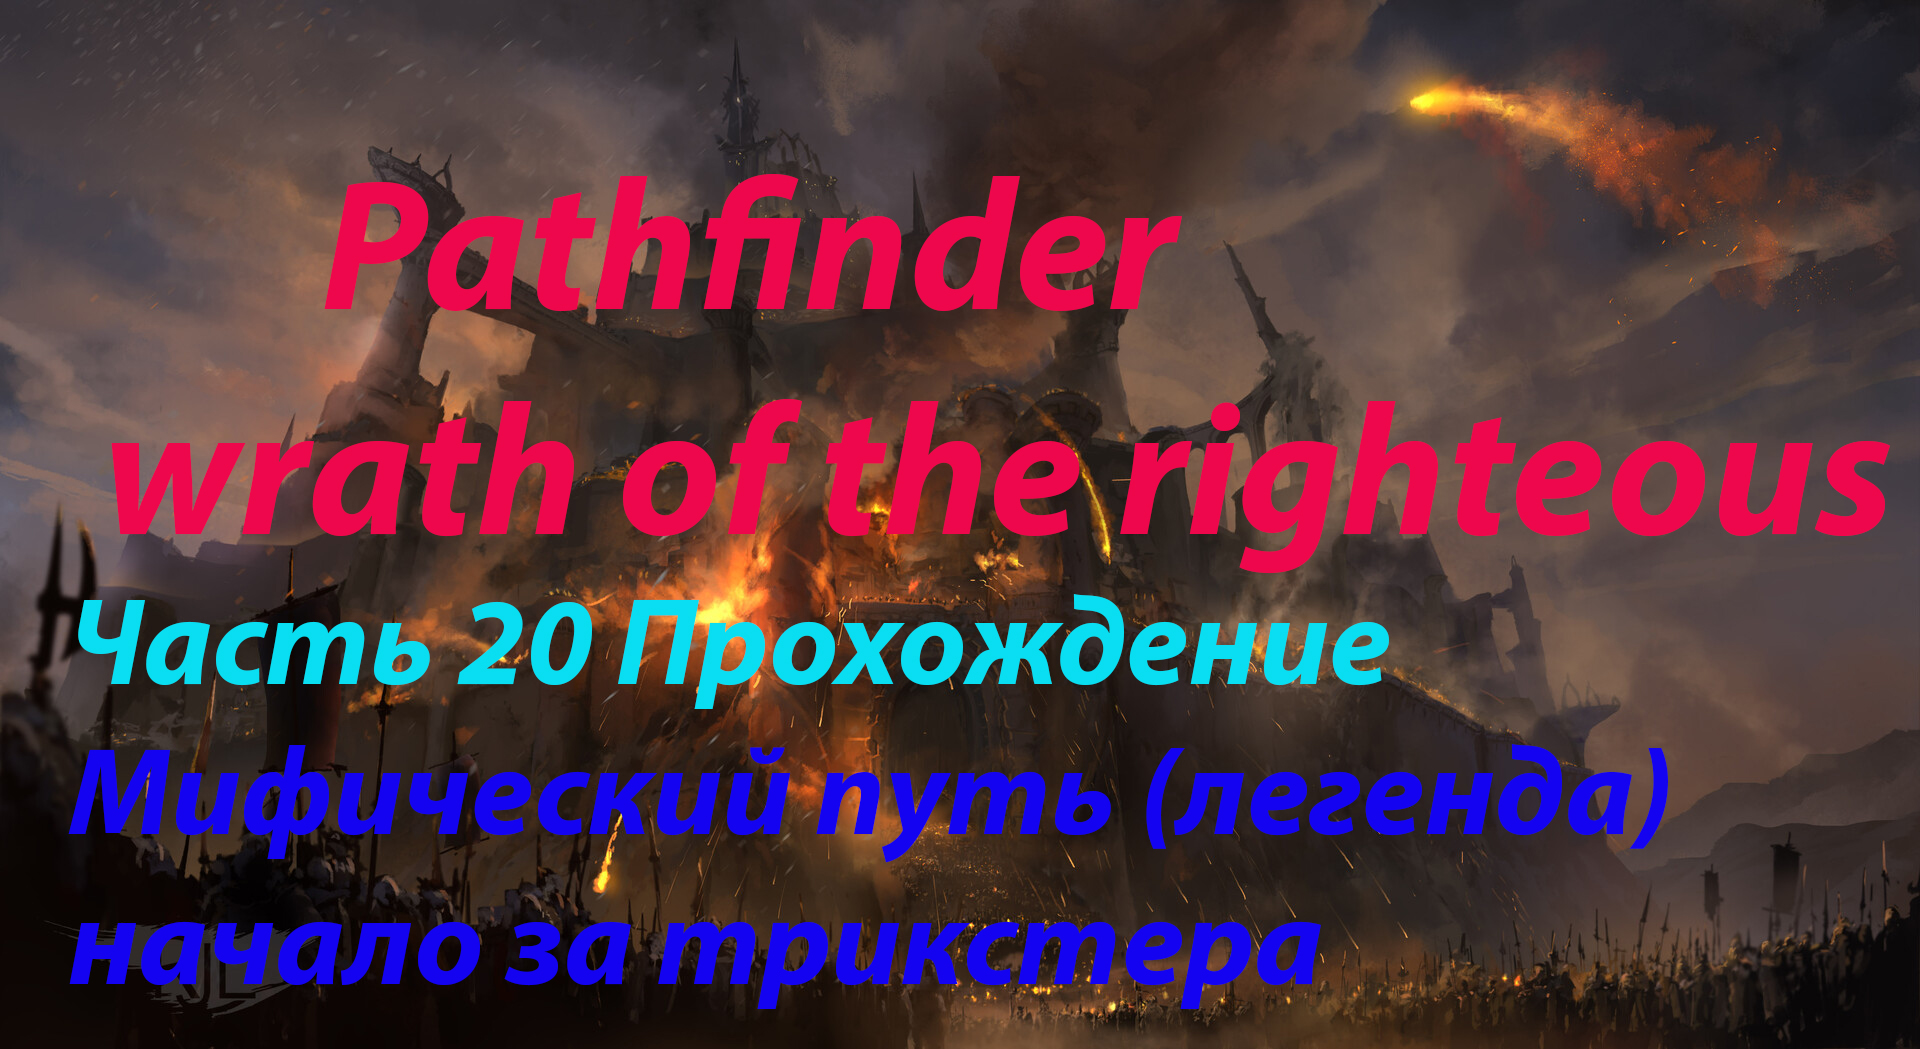 Pathfinder wrath of the righteous part20 (legend)